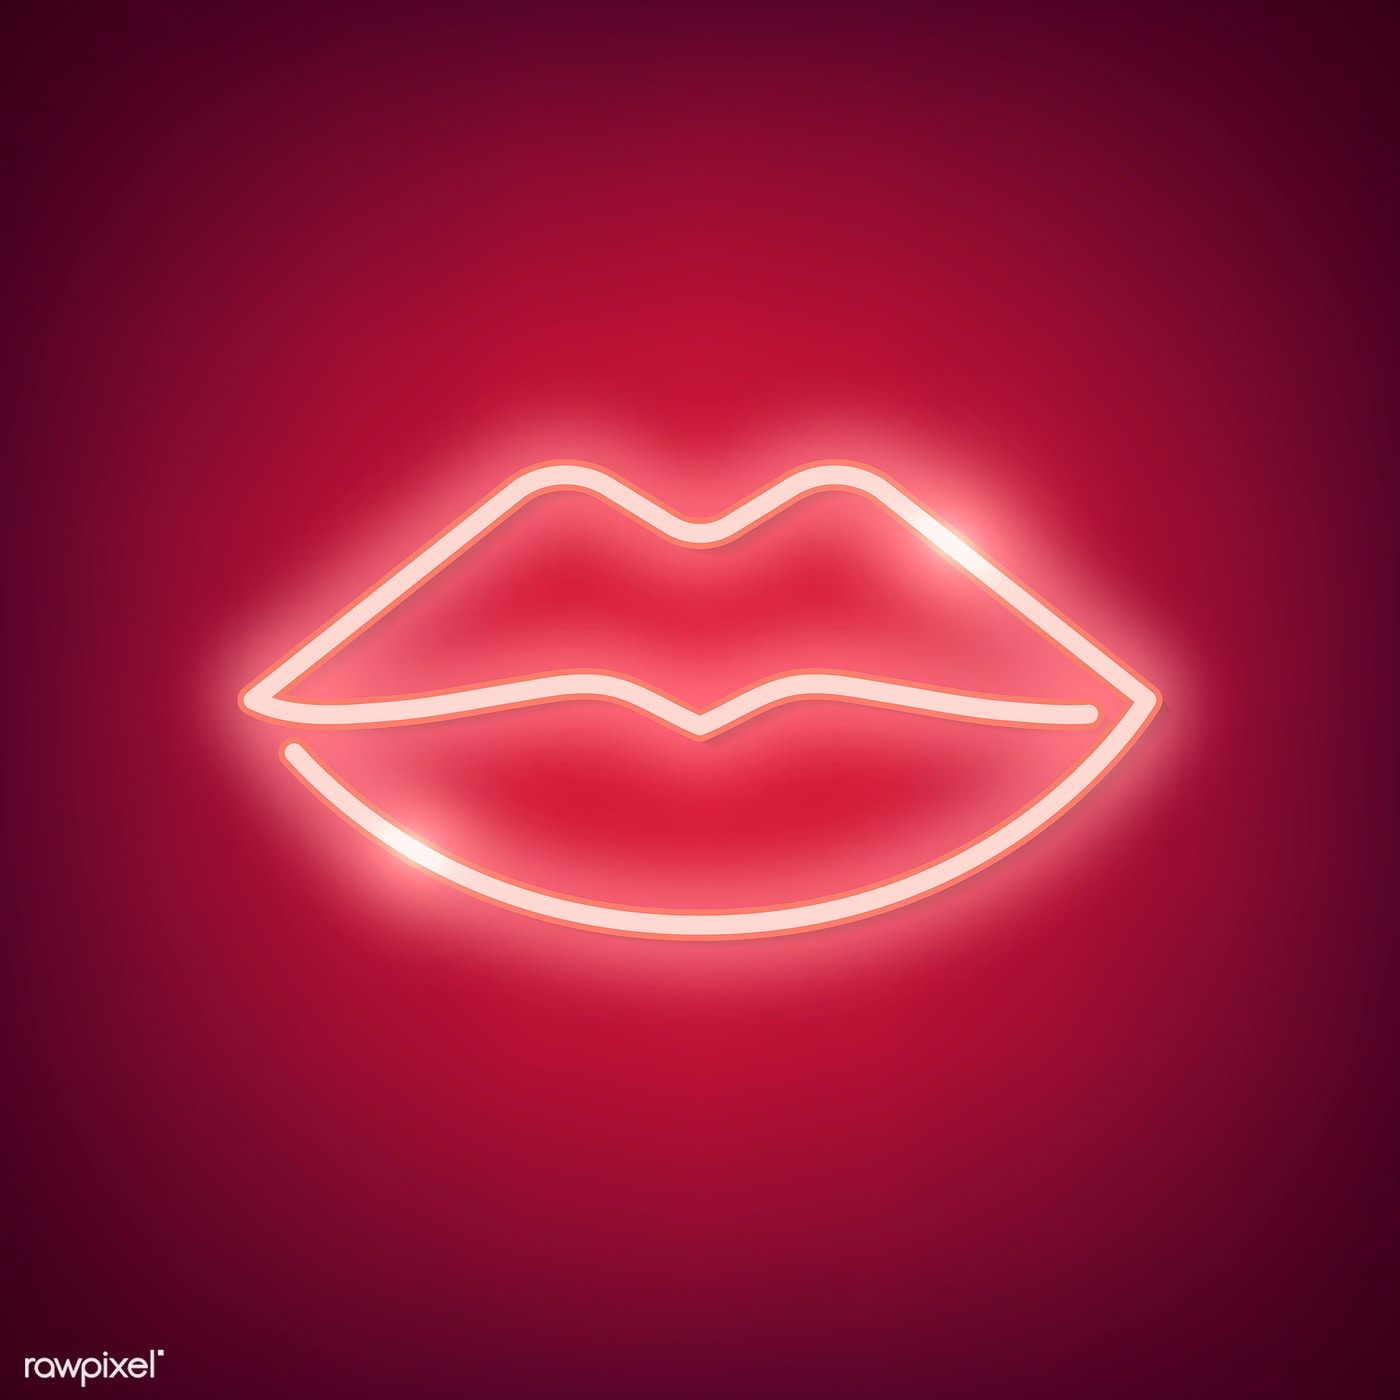 Neon lips icon on a red background - Light red